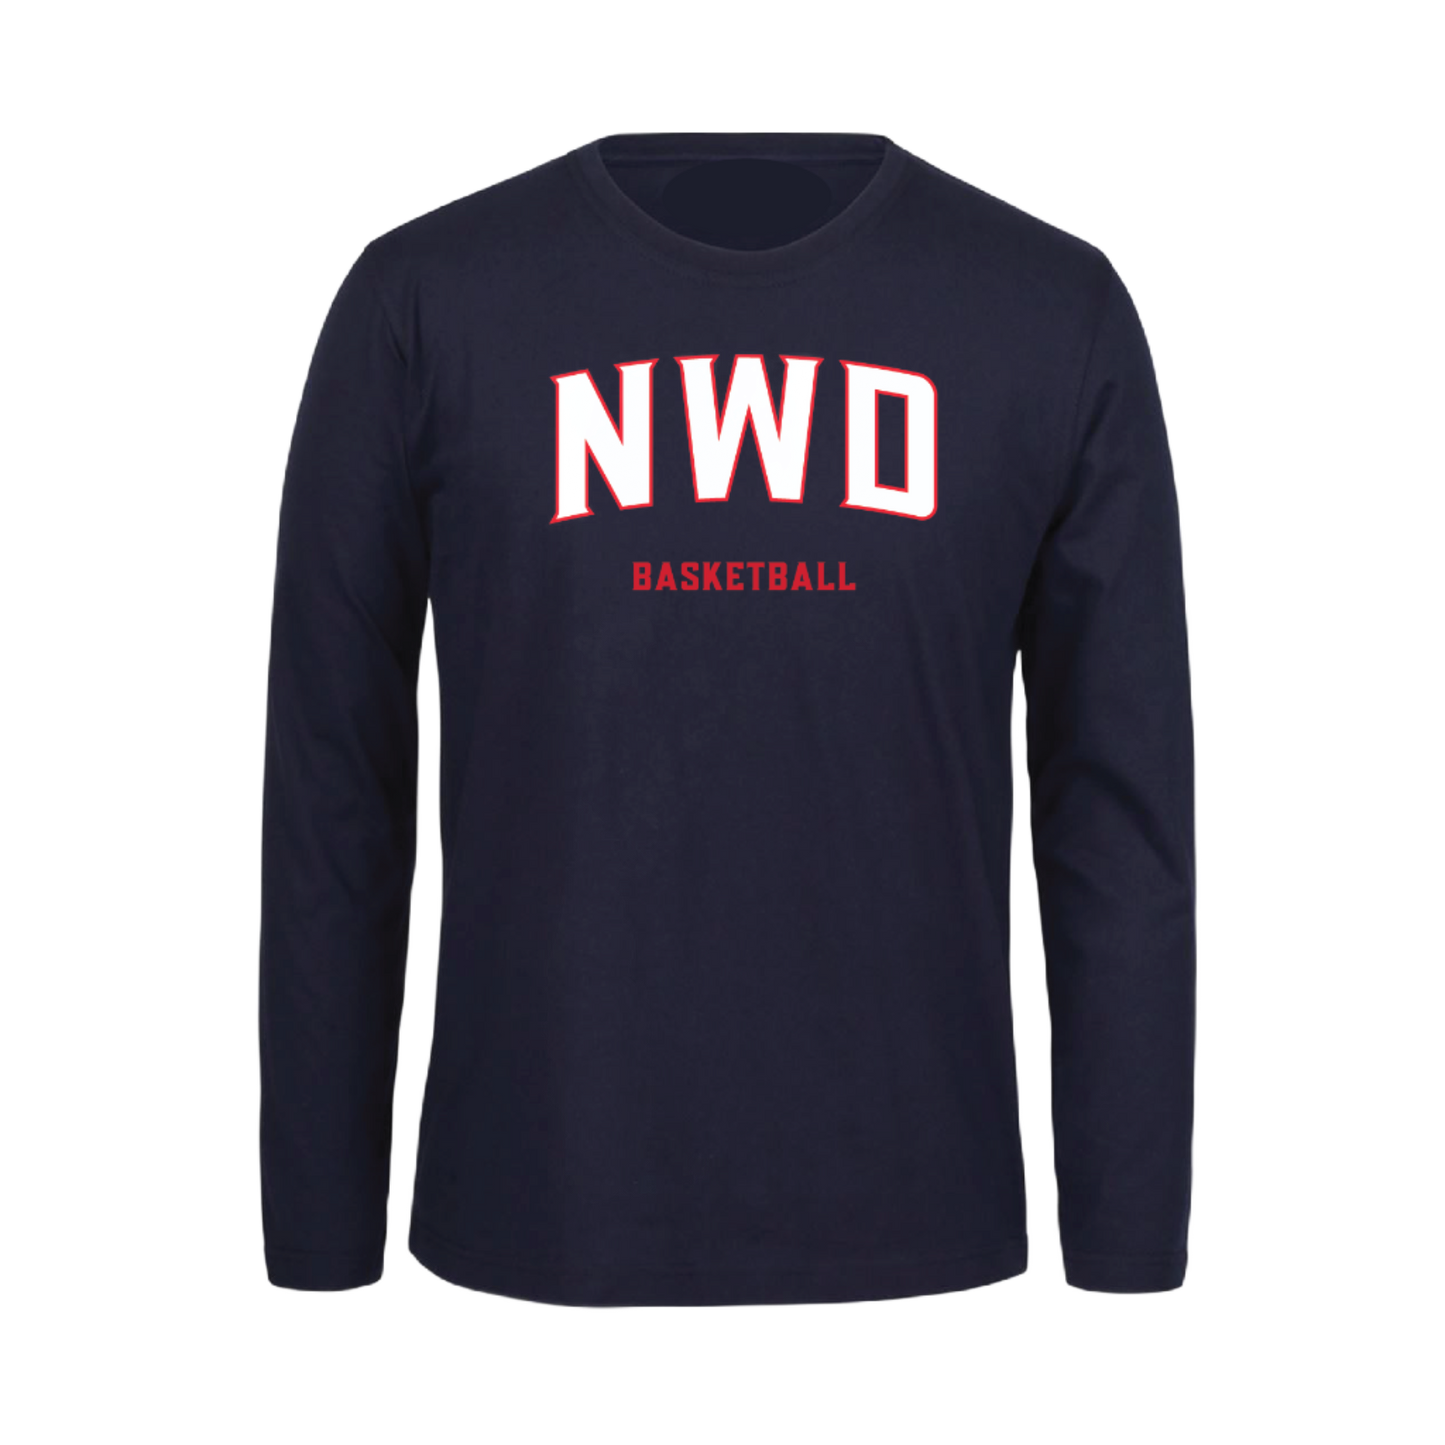 NORWOOD FLAMES - CLUB NWD FRONT TEE NAVY LONG SLEEVE